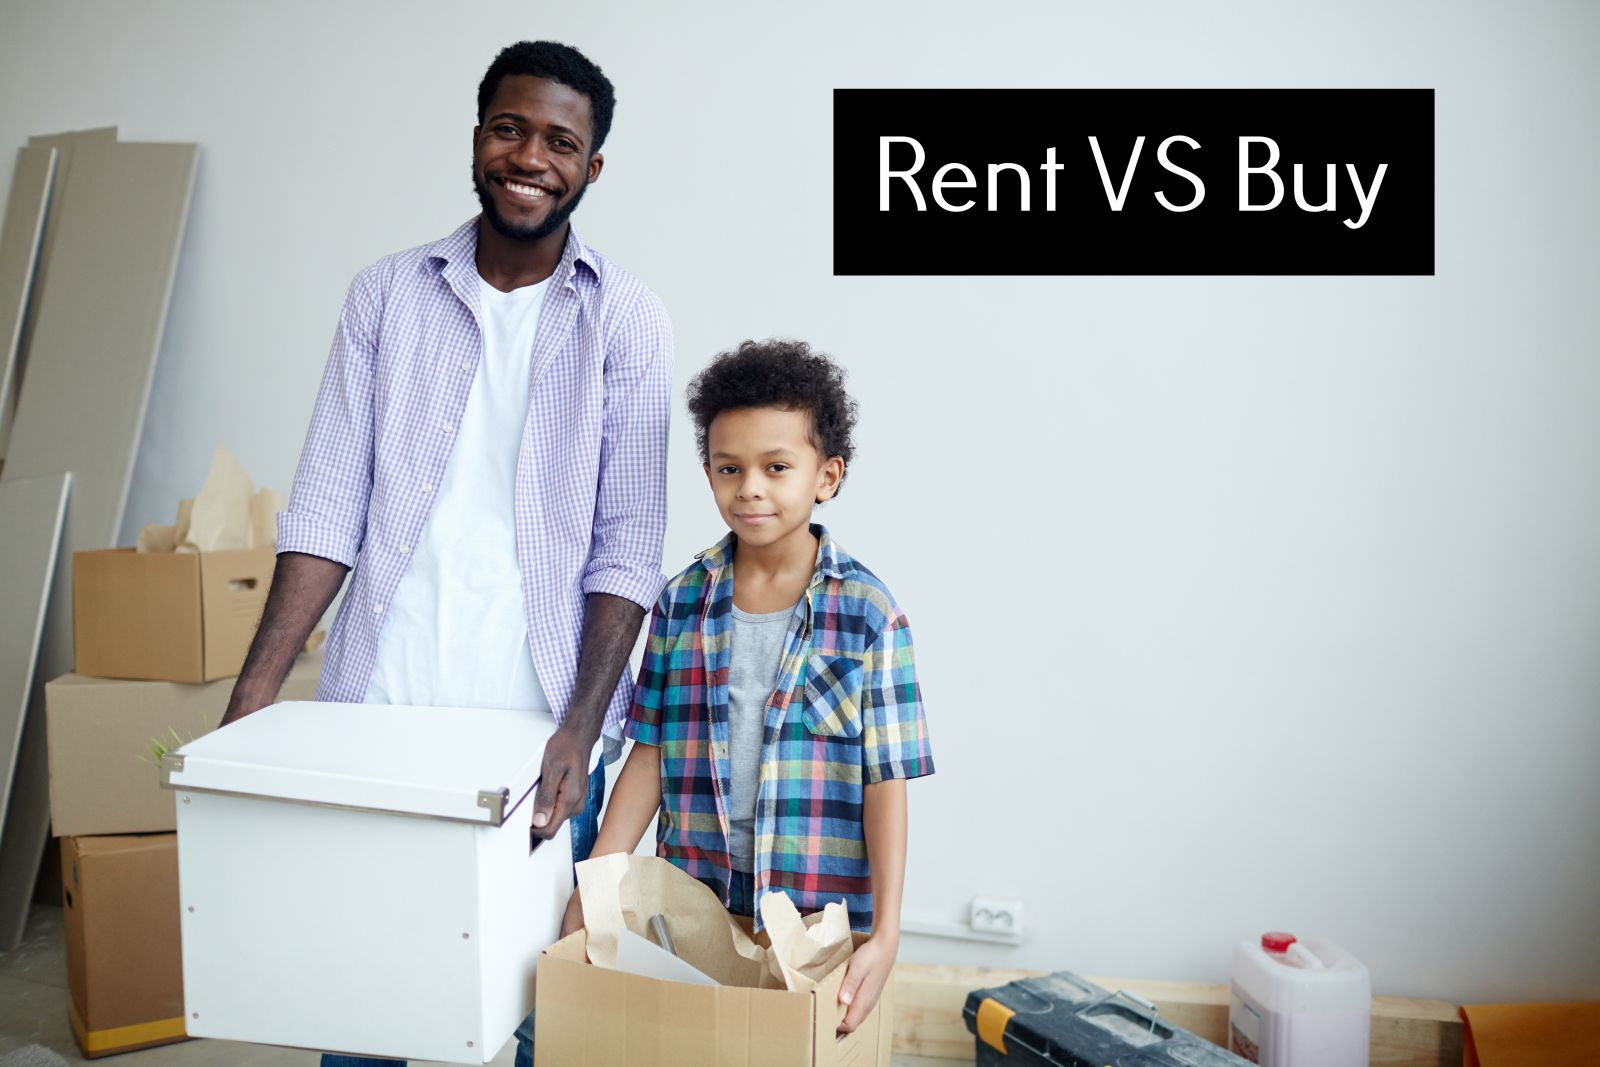 Rent Vs Buy: What Should You Do?